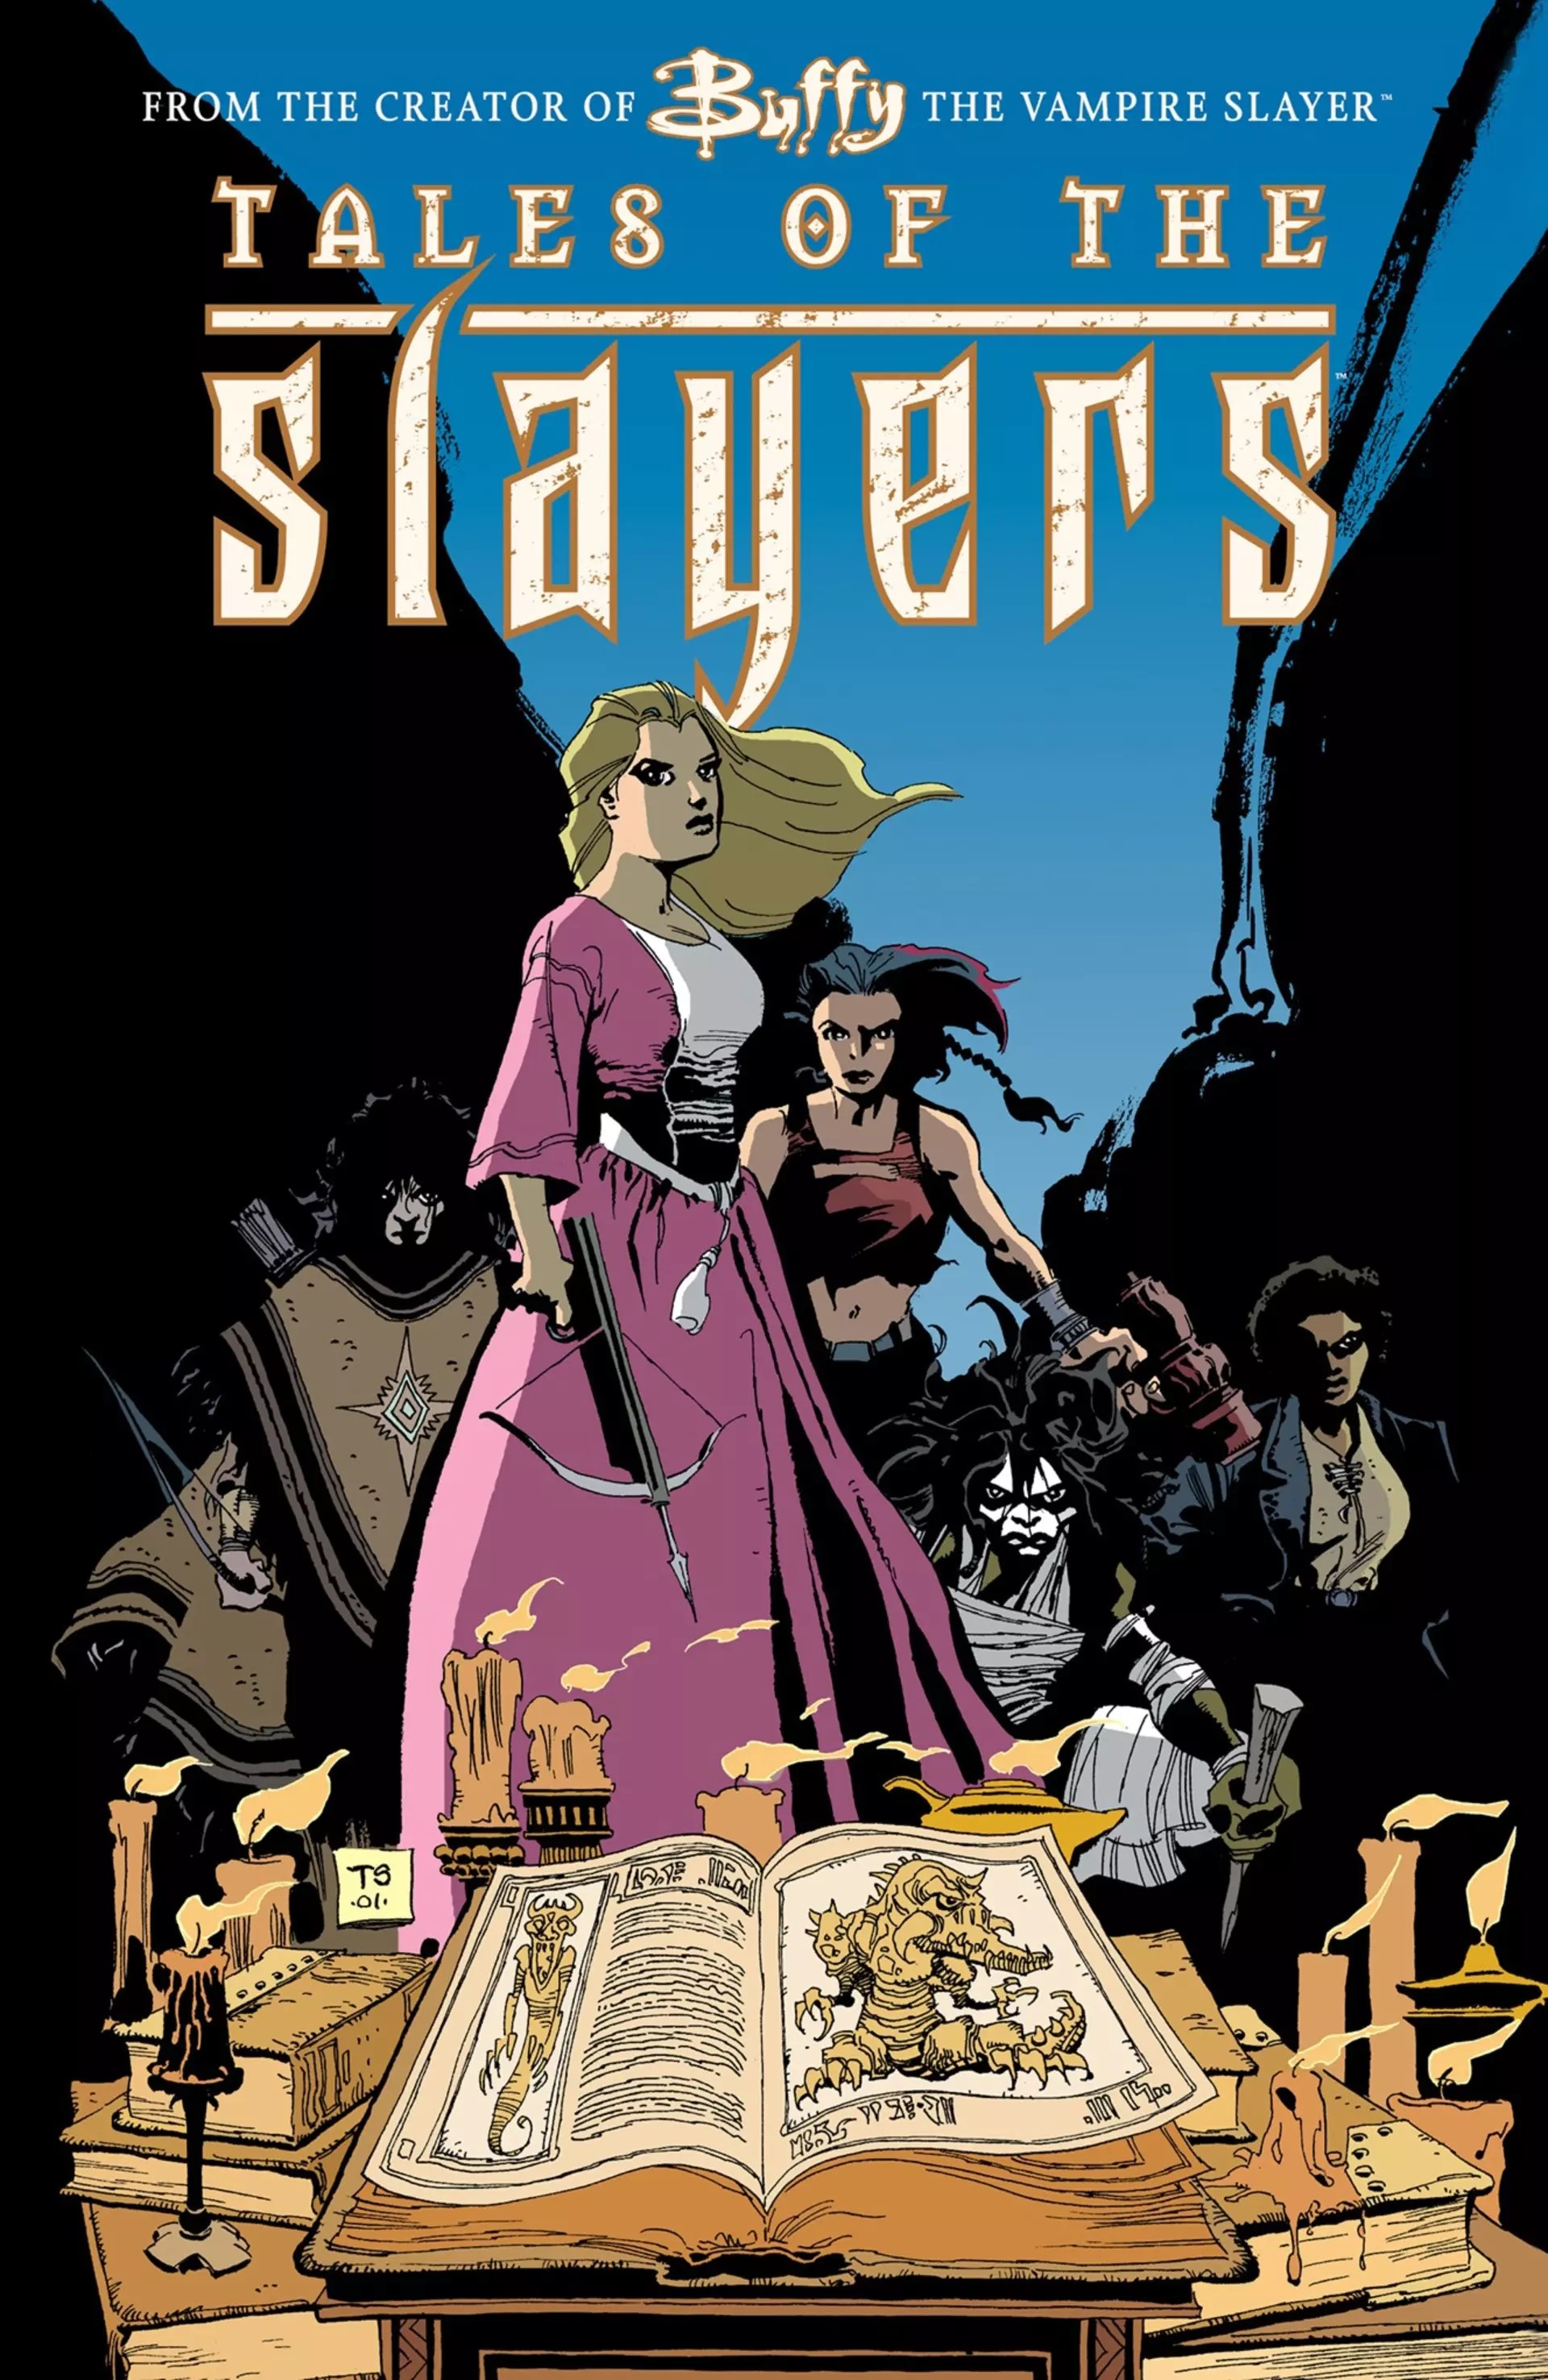 Read online Buffy the Vampire Slayer: Tales of the Slayers comic -  Issue # TPB - 1